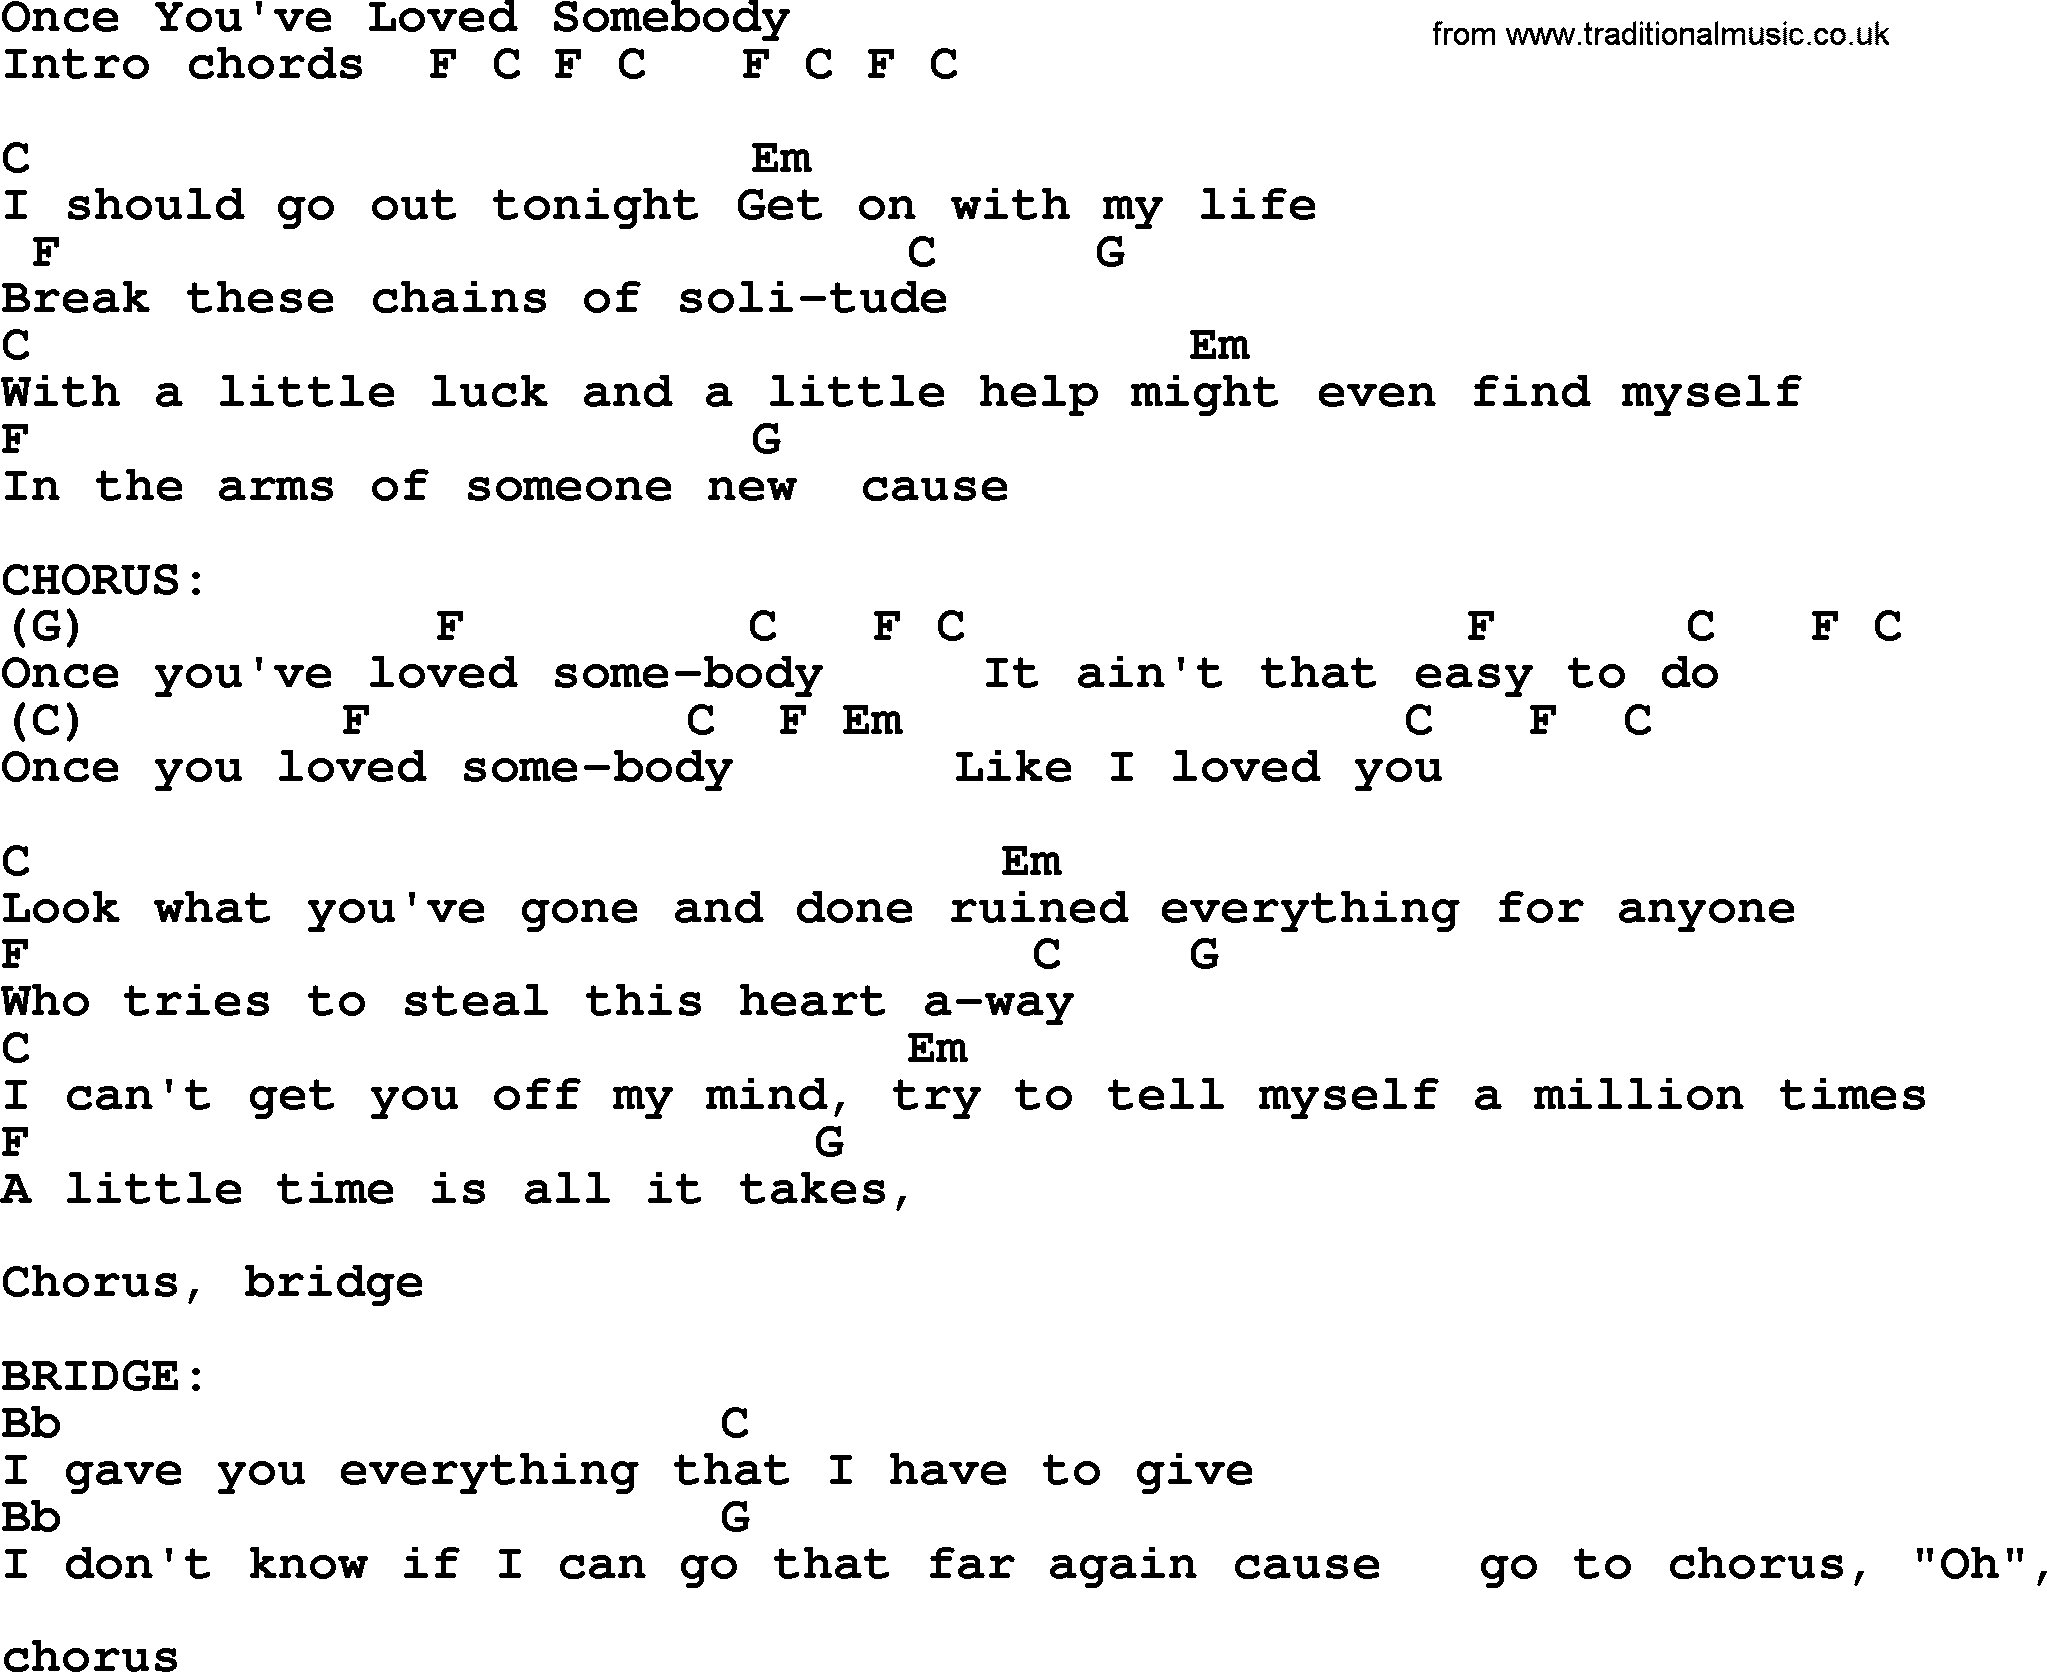 Bluegrass song: Once You've Loved Somebody, lyrics and chords